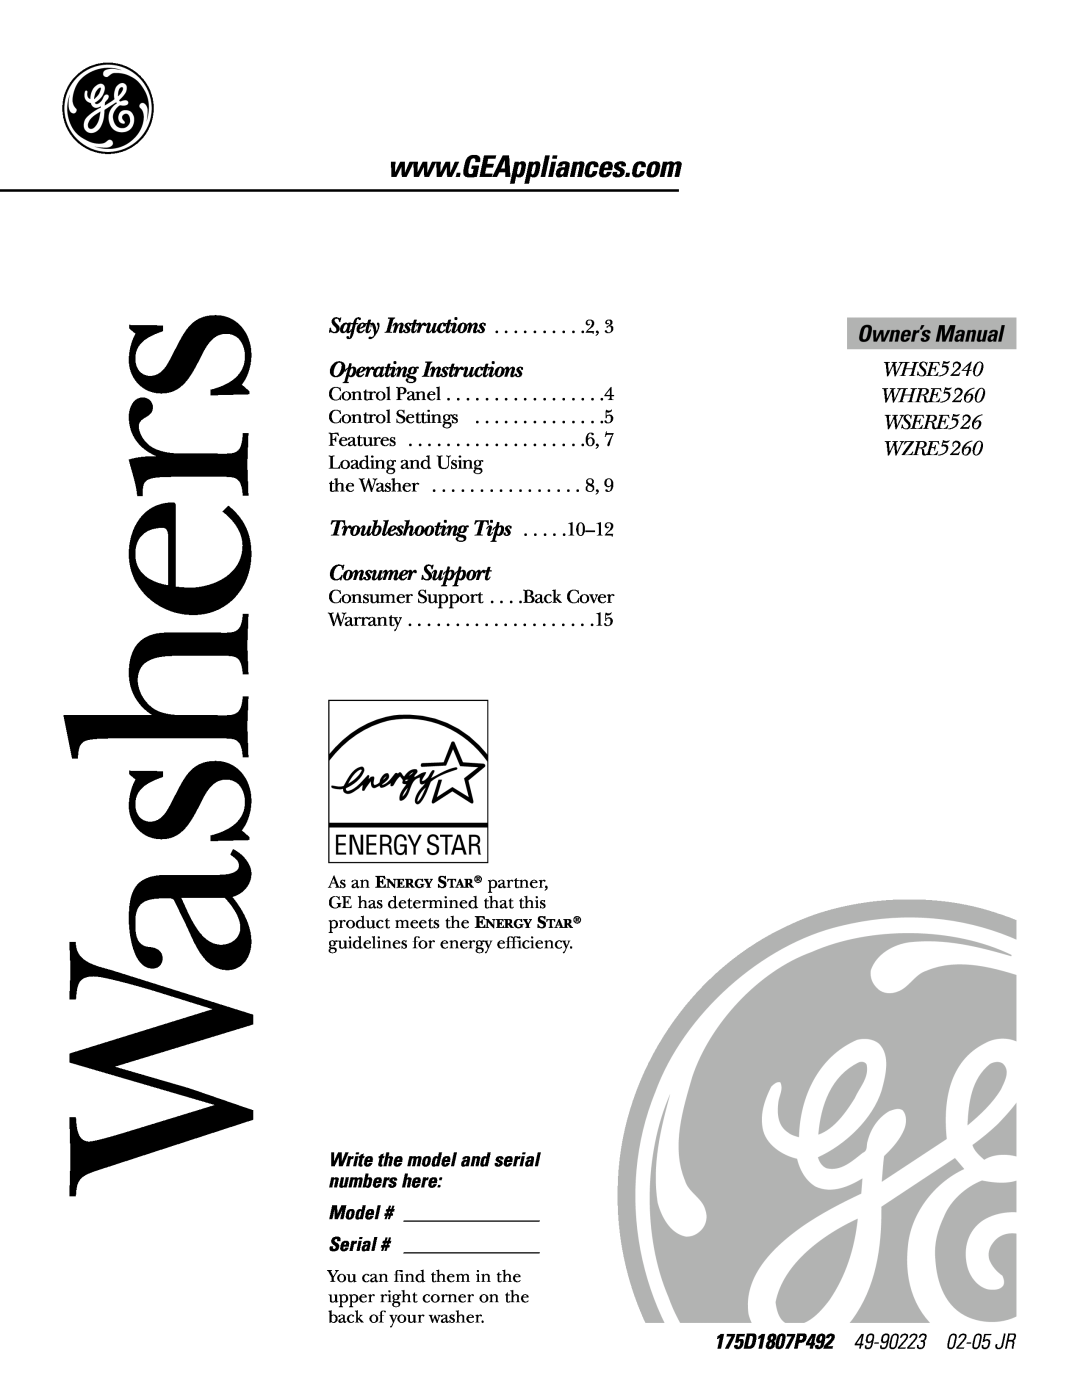 GE WSERE526 owner manual 175D1807P492 49-90223 02-05JR, Write the model and serial numbers here, Washers, Consumer Support 